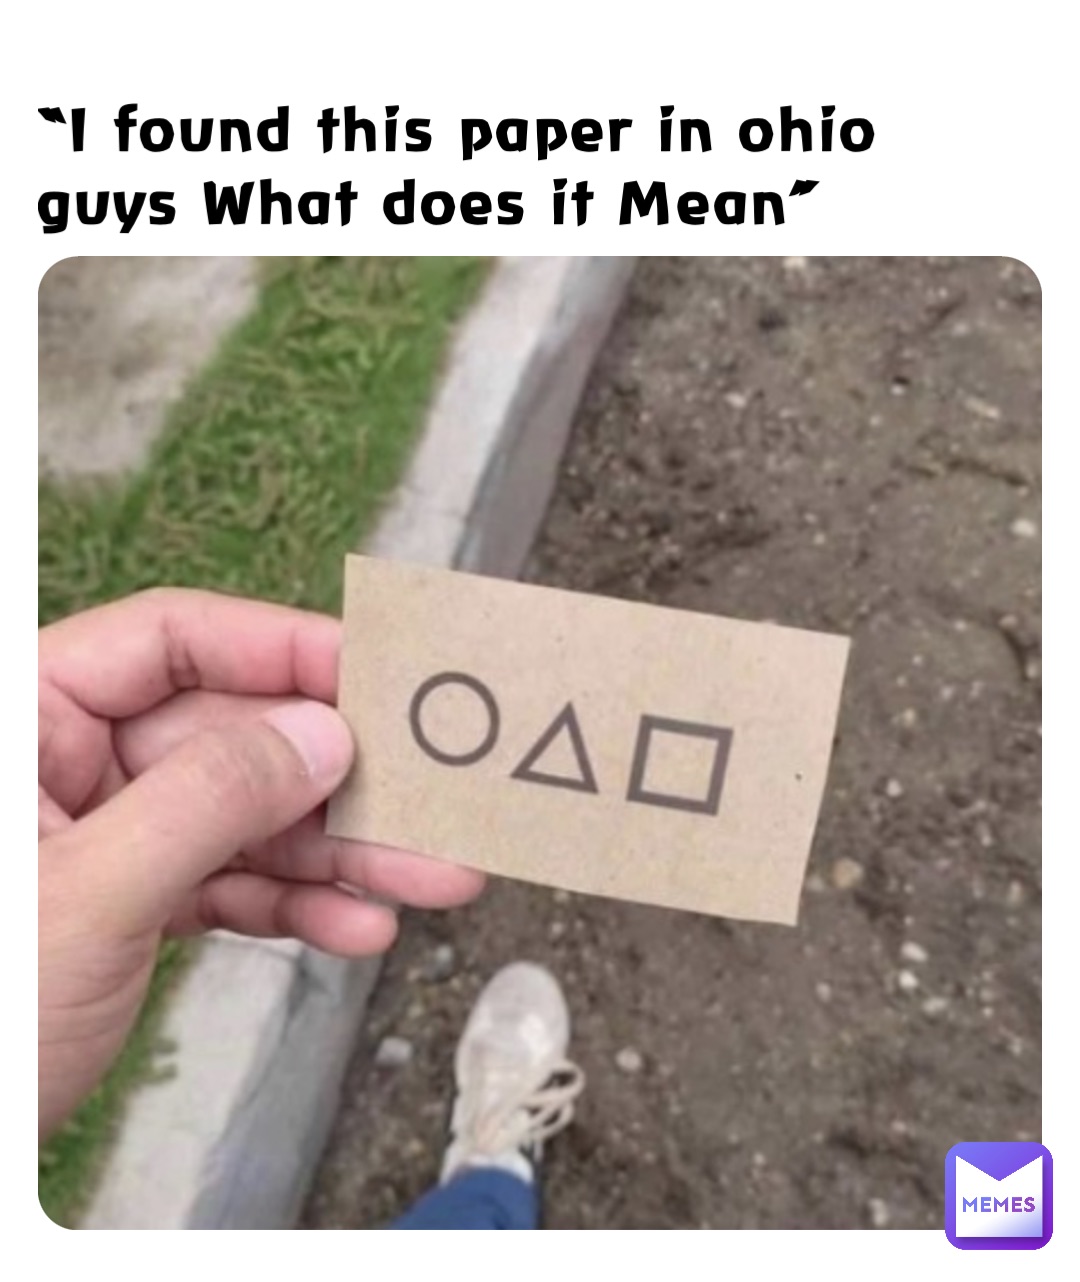 “I found this paper in ohio guys What does it Mean”